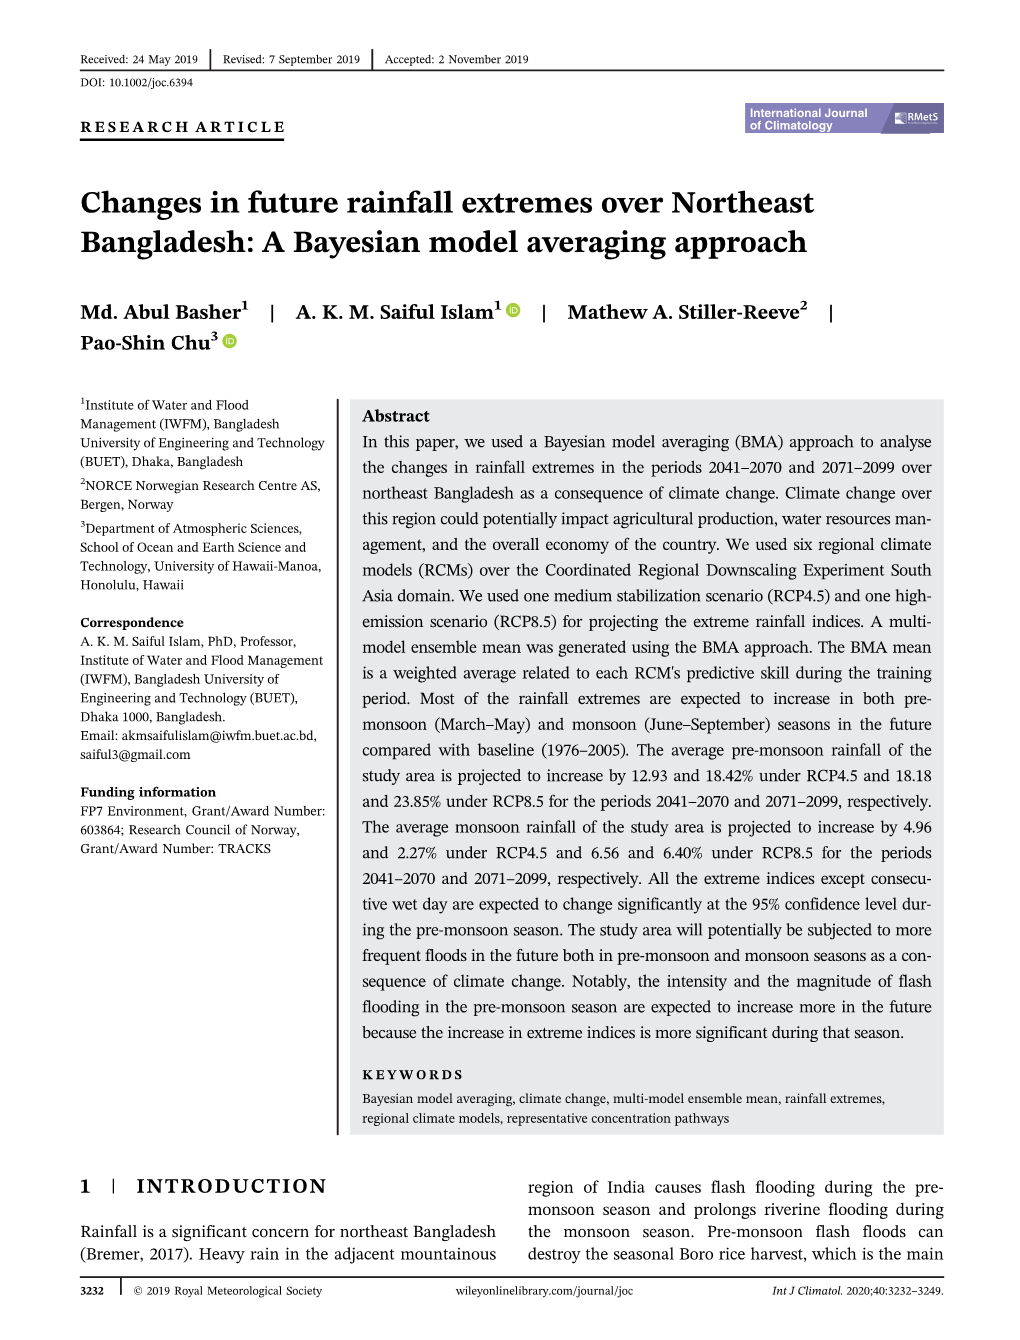 Changes in Future Rainfall Extremes Over Northeast Bangladesh: a Bayesian Model Averaging Approach